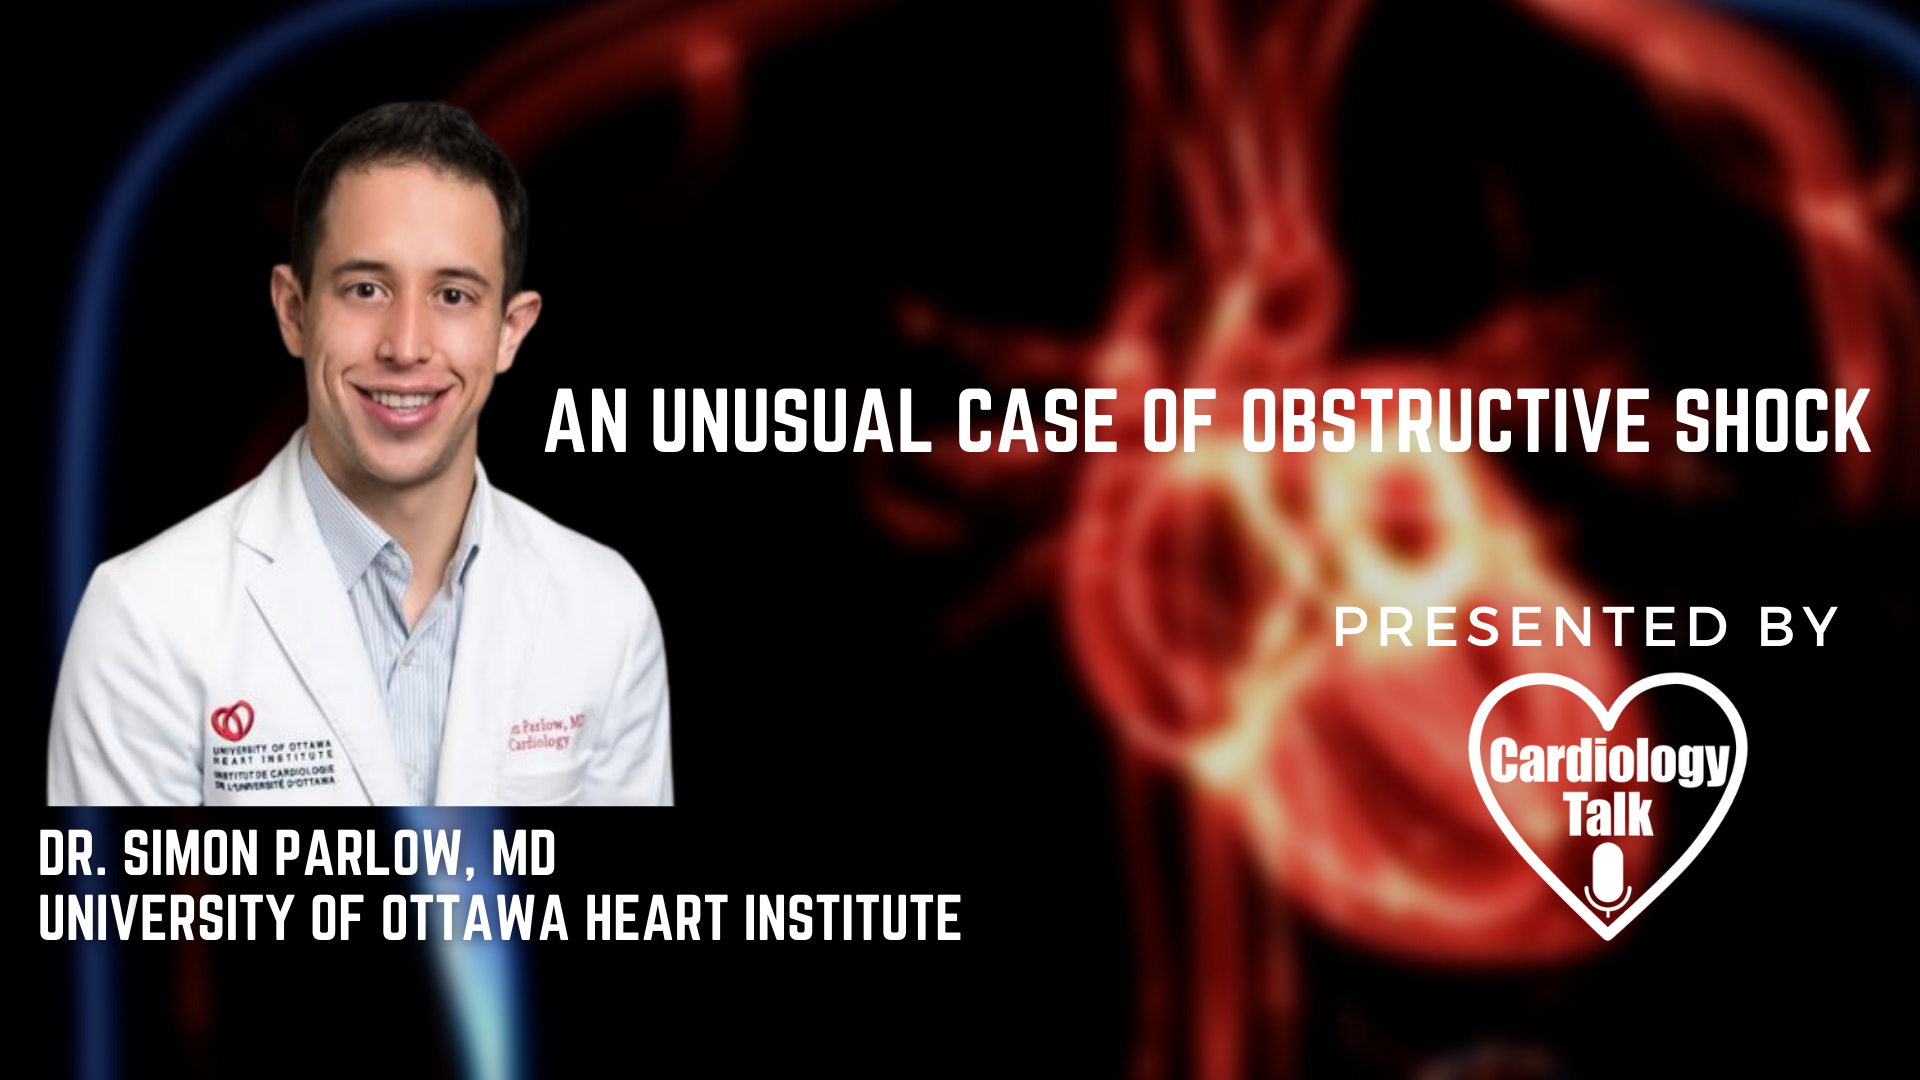 Dr. Simon Parlow - An Unusual Case of Obstructive Shock